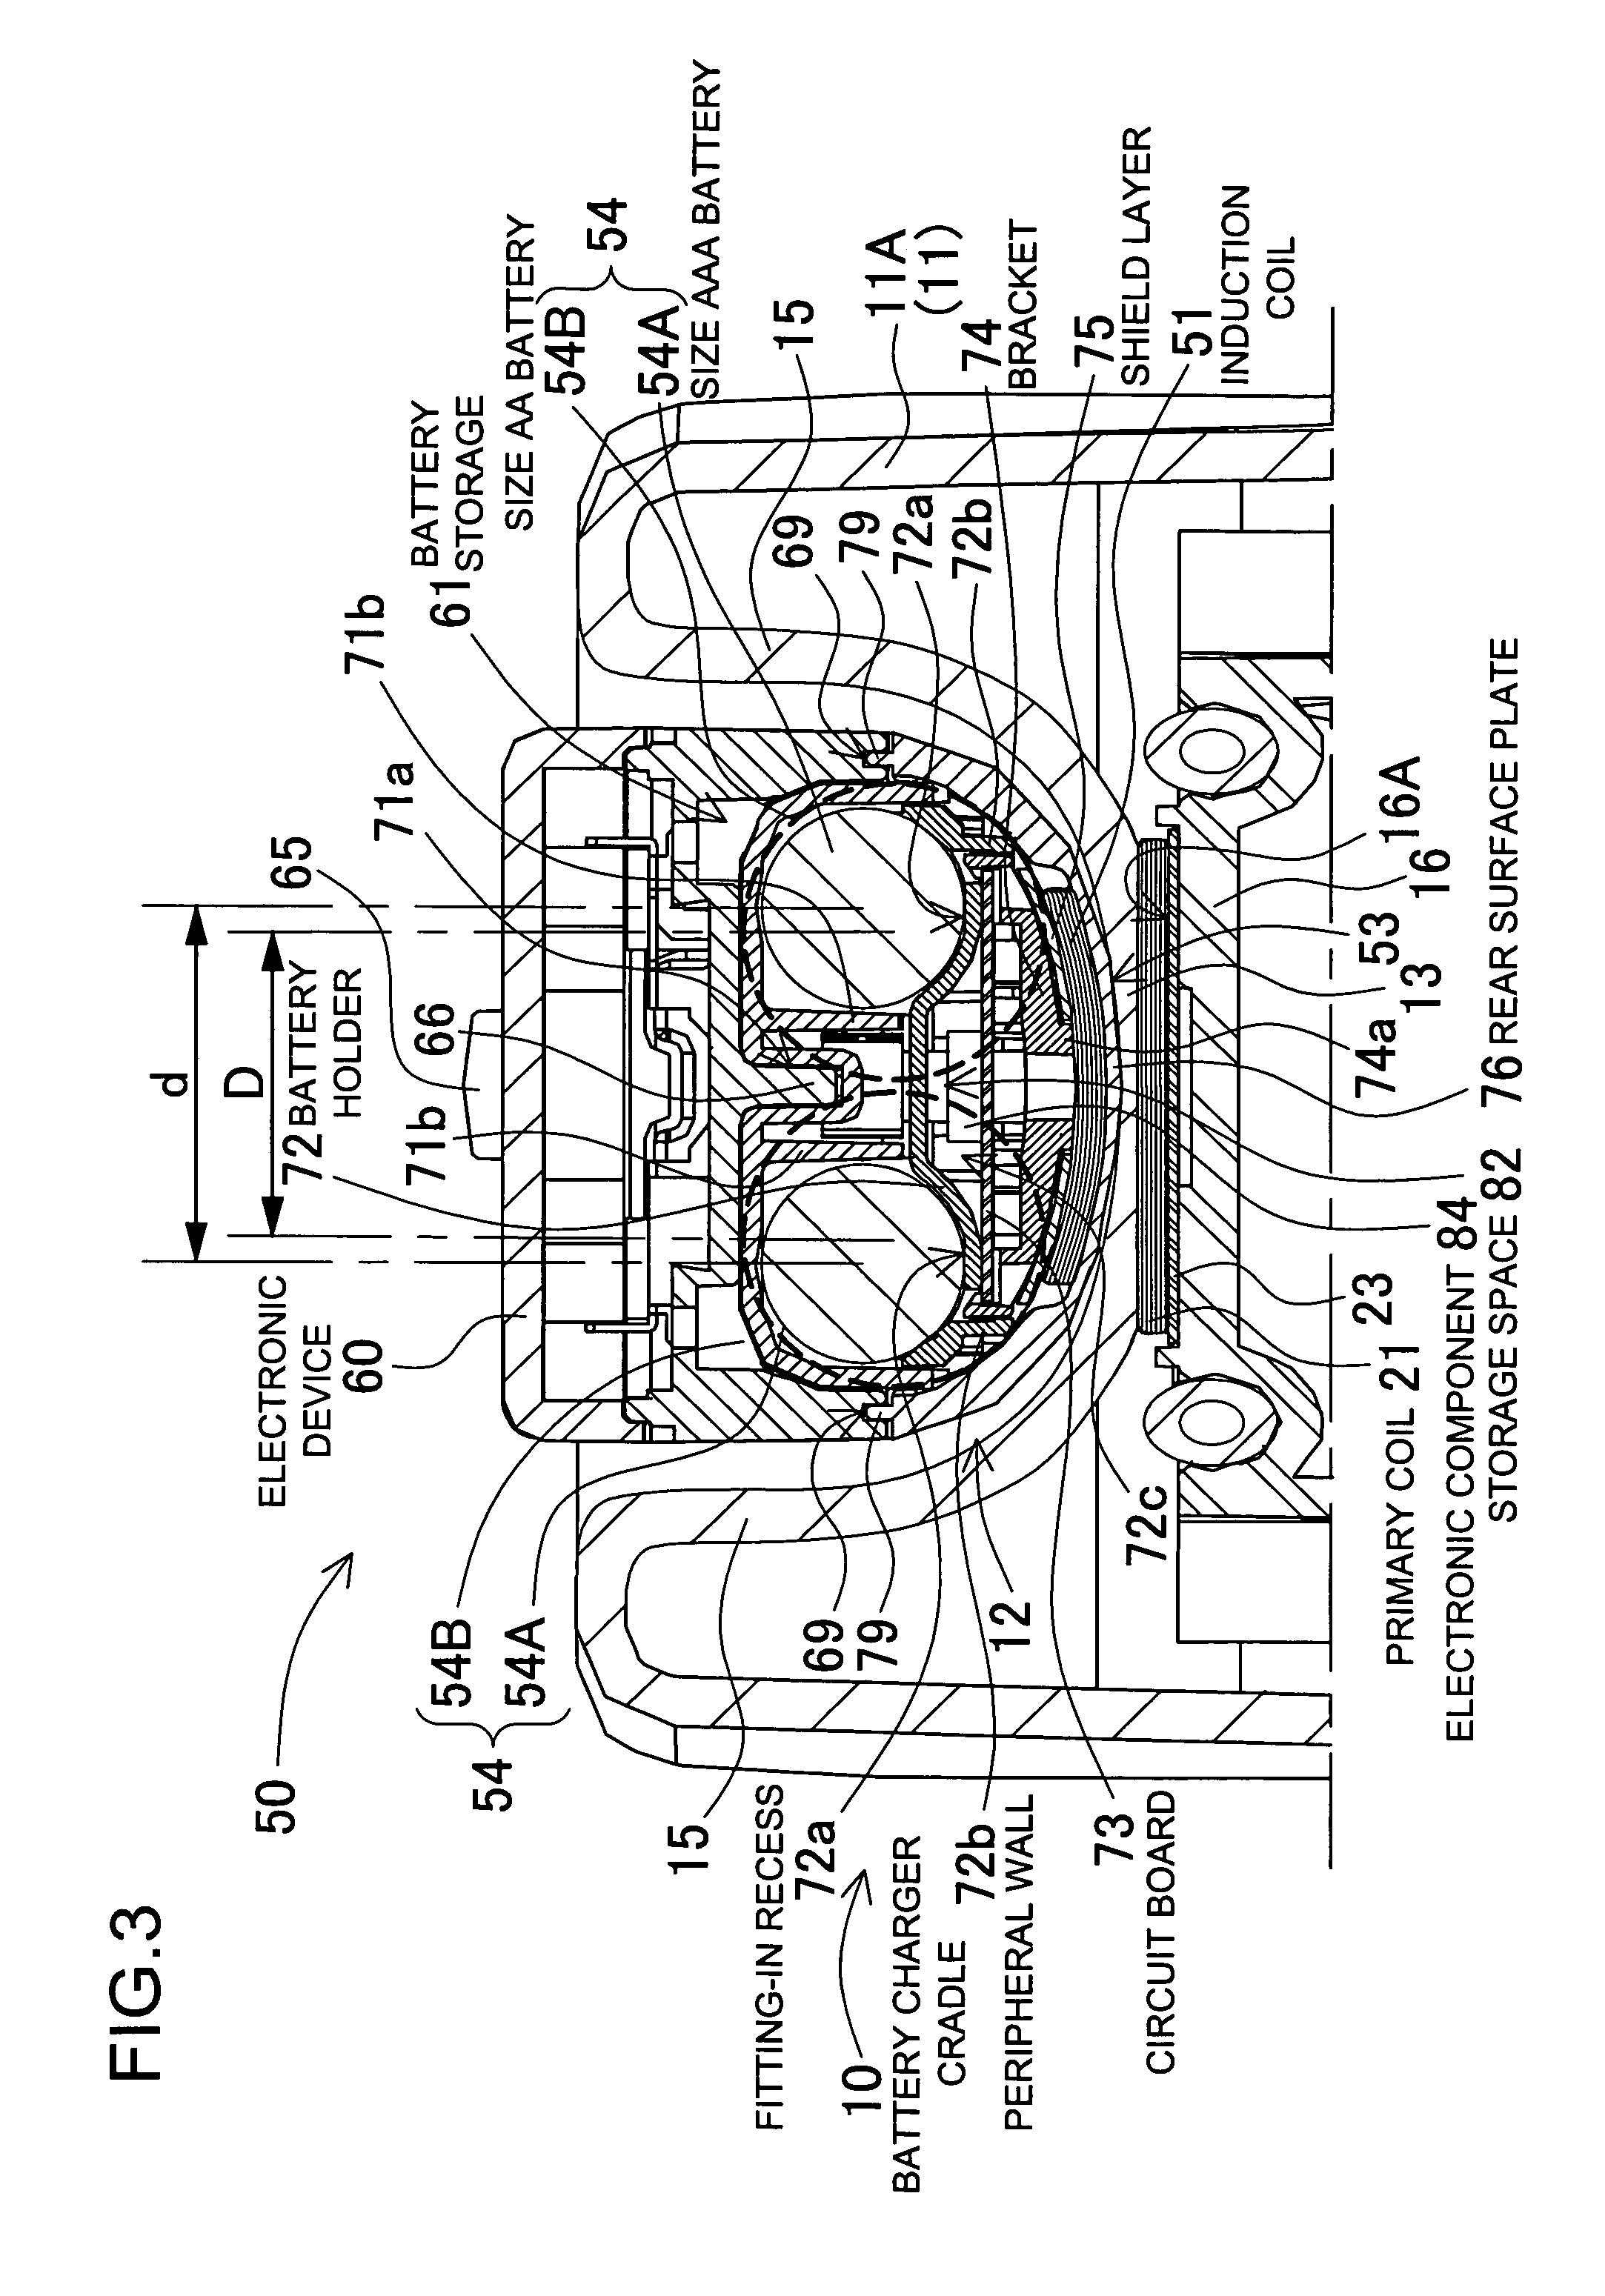 Substitute battery pack including a case to accommodate a smaller battery type with an induction coil to facilitate charging